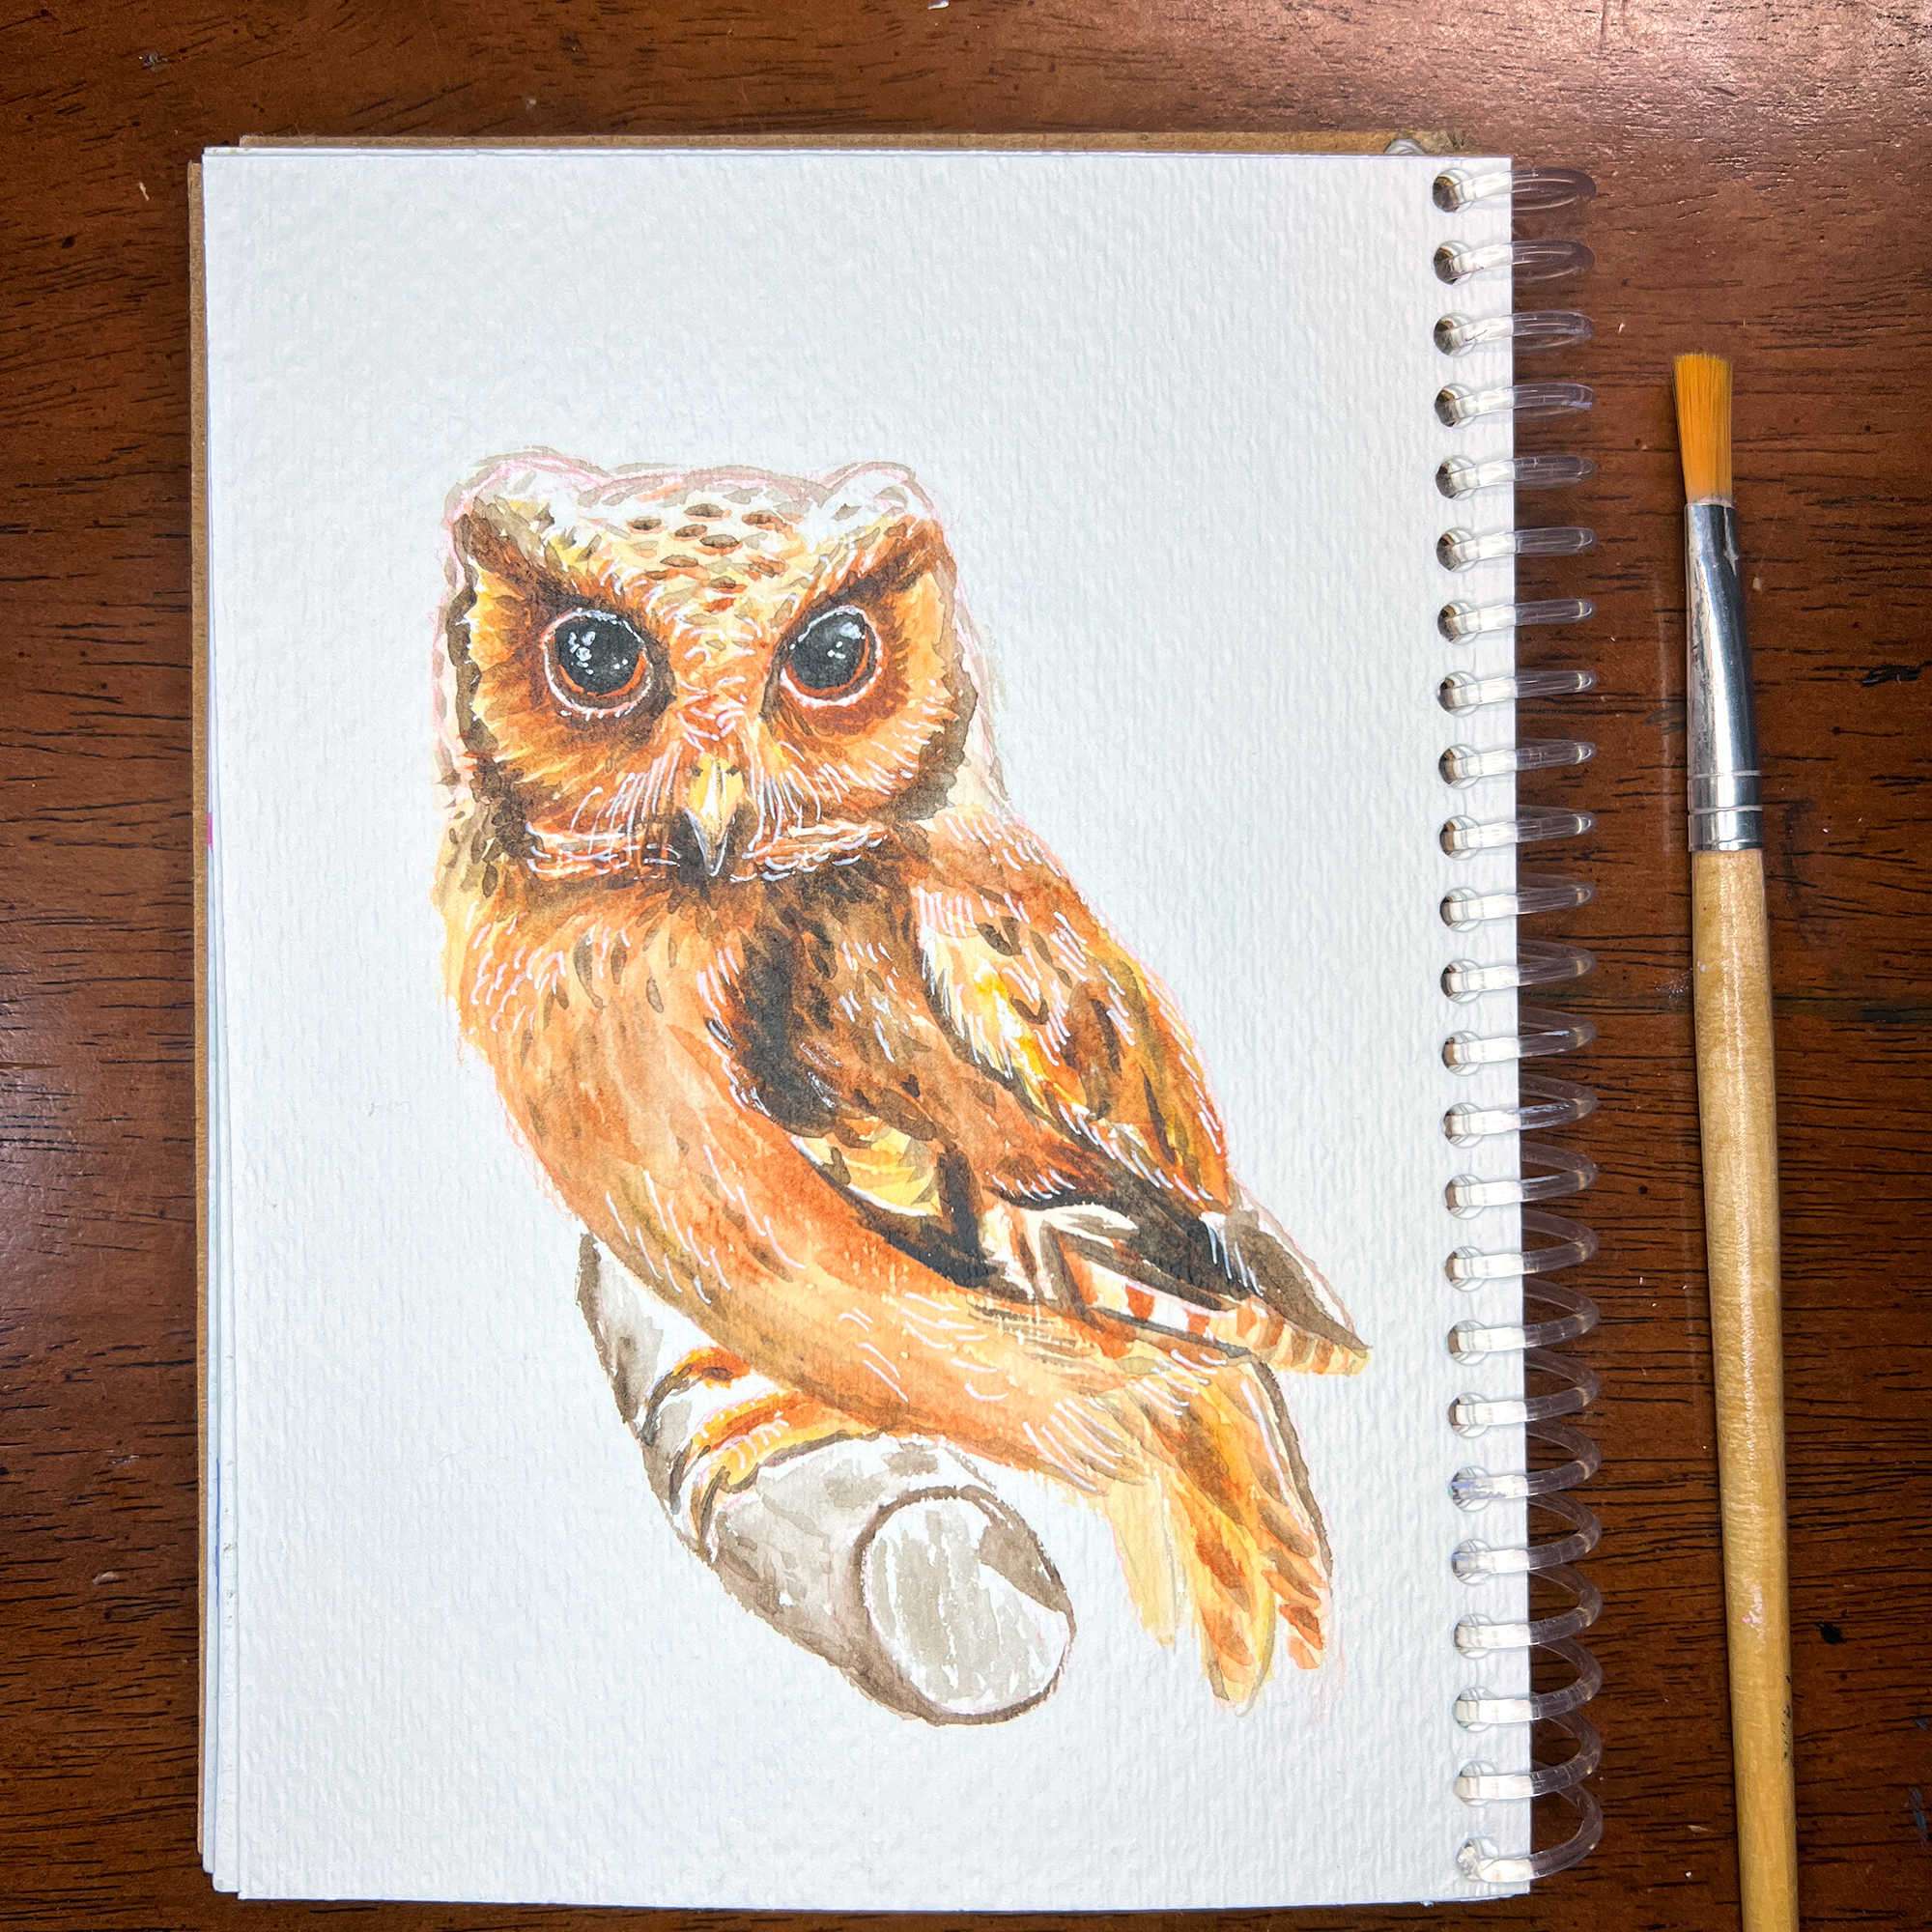 Watercolor painting of an owl in a sketchbook with a brush resting on the side.